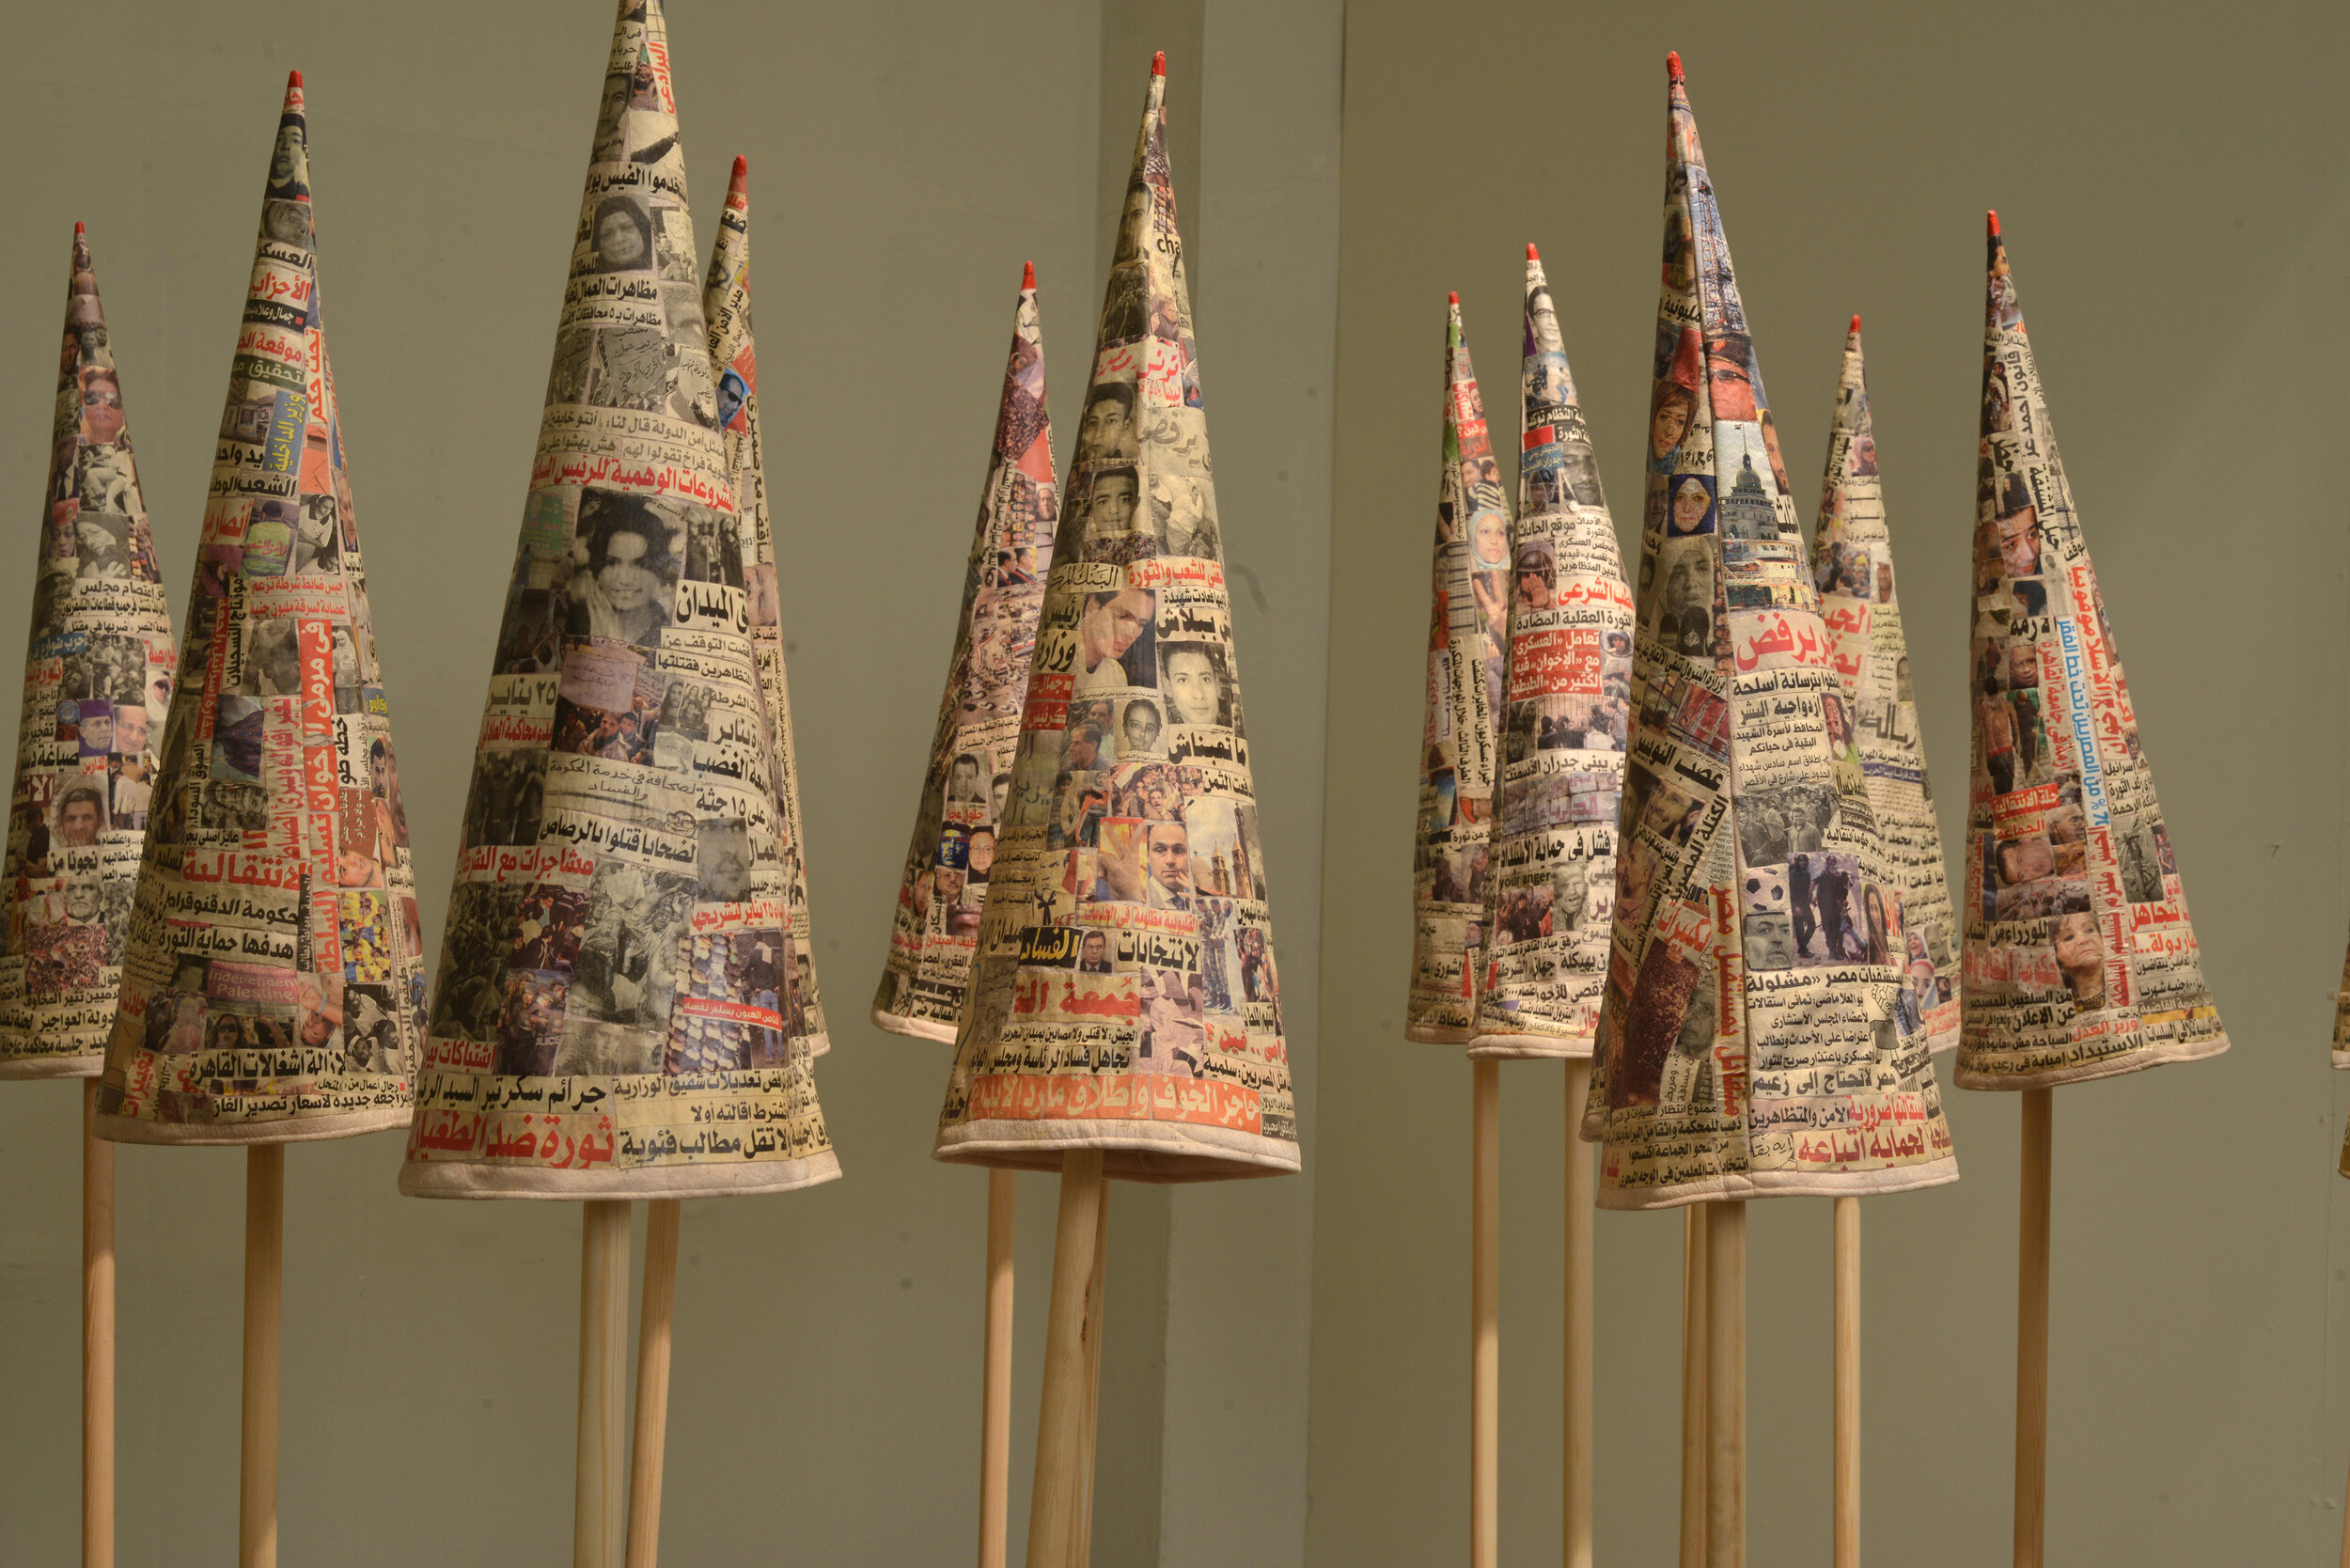  The Fool’s Journal (detail), 2013 - 2014, installation of newspaper cut-outs on fabric, wood, 17 pieces, 52 x 19 cm diameter (each) 